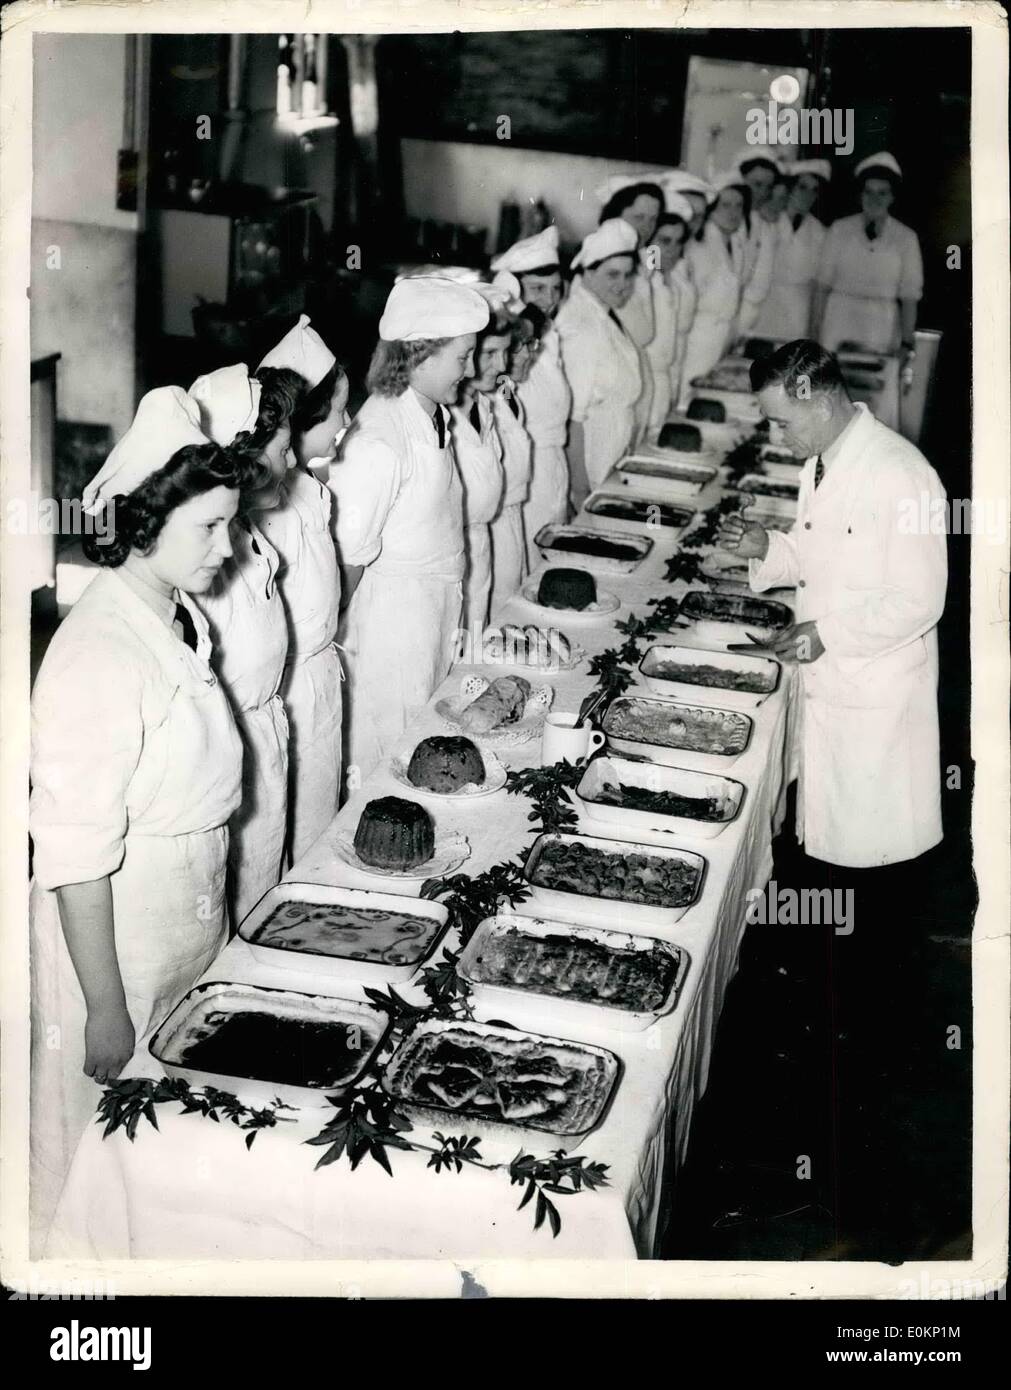 May 05, 1942 - Cooked By The W.A.A.F.: Photo shows. A table full of good things to eat, made by members of the W.A.A.F. who are Stock Photo